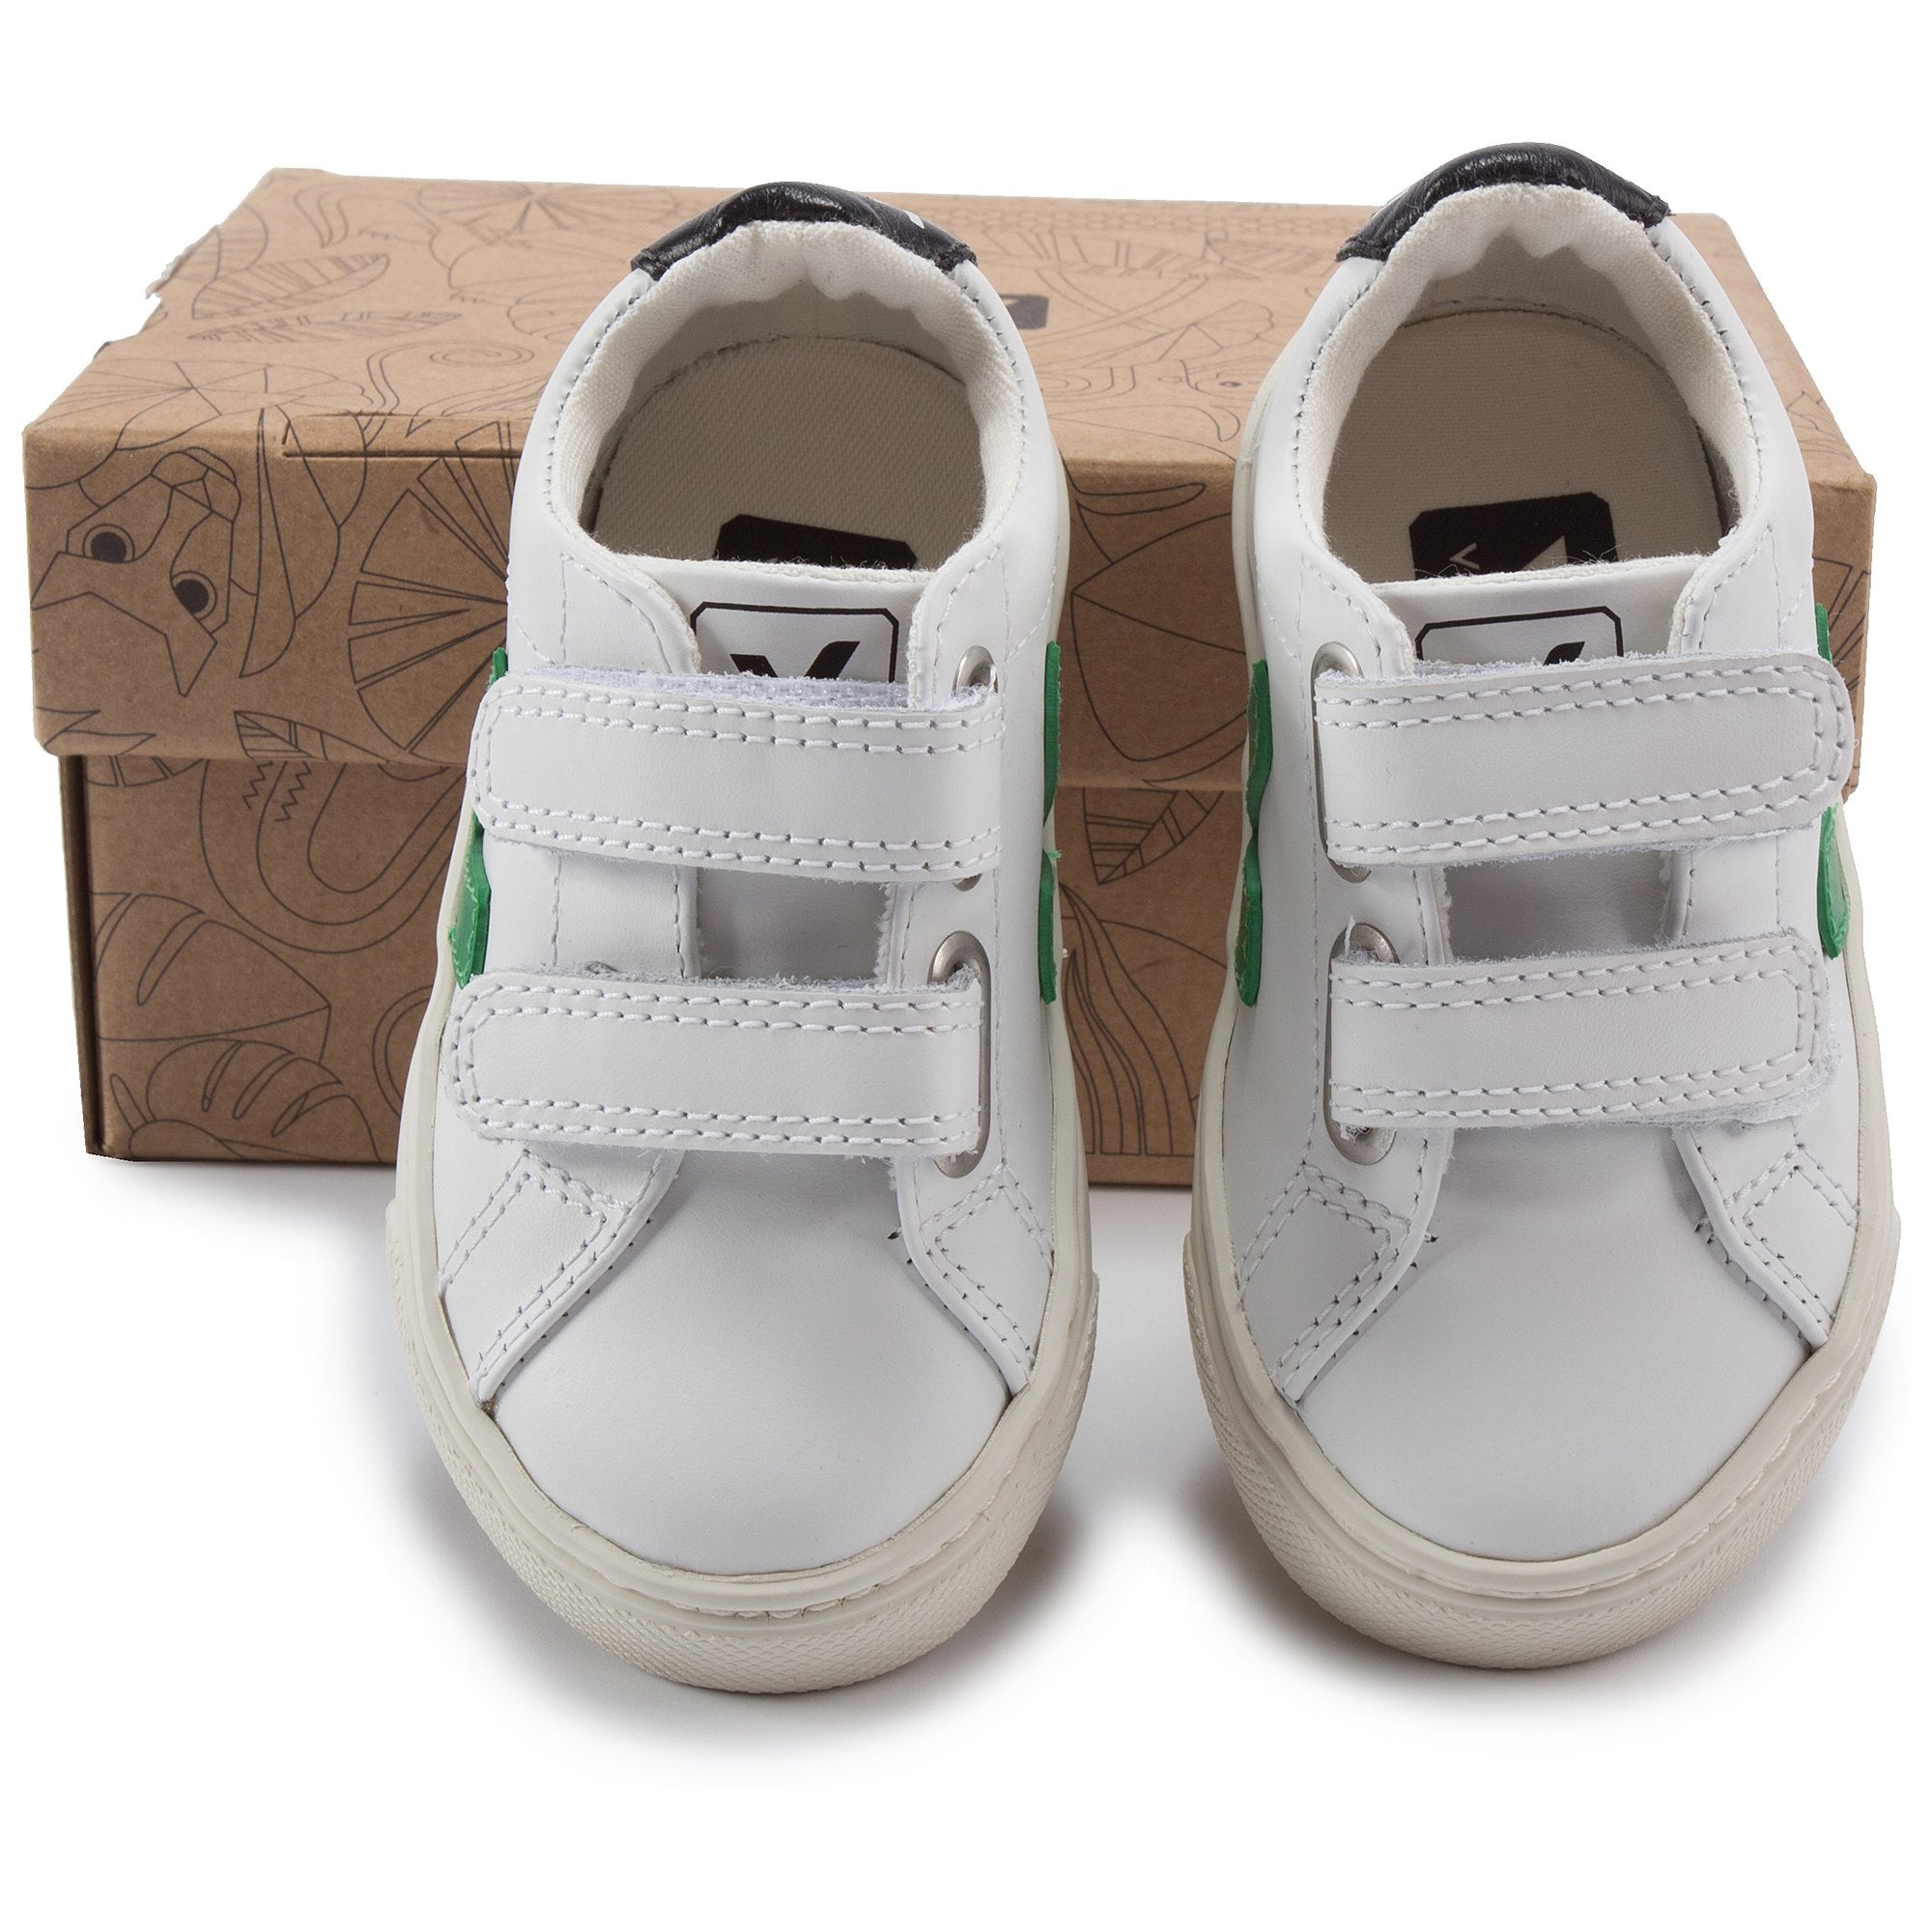 Girls & Boys White Leather Velcro With Green "V" Shoes